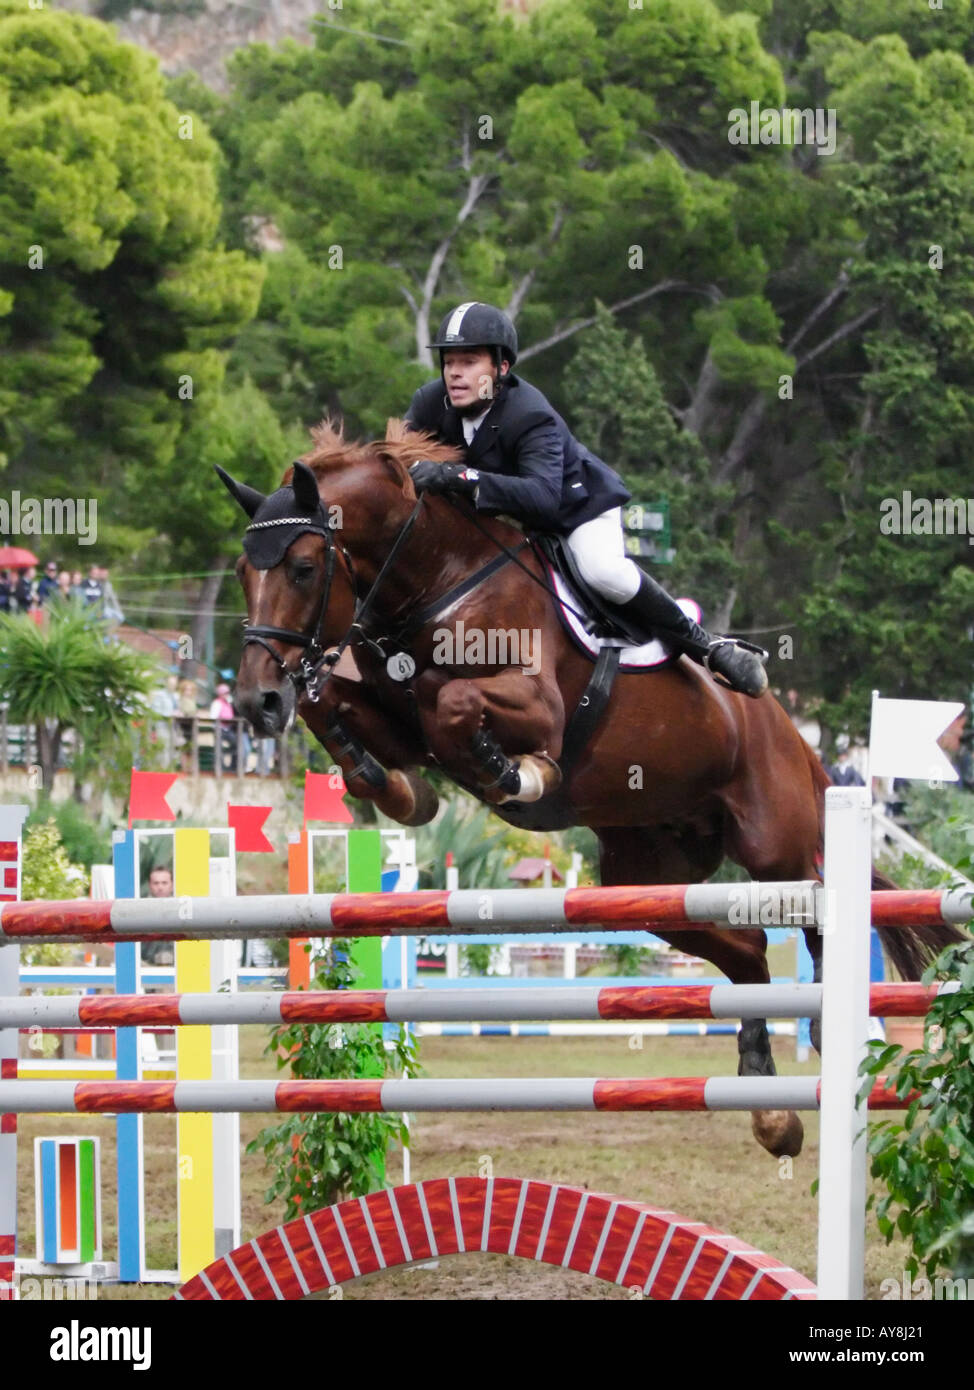 horse and rider jumping over obstacle during equestrian competition Stock Photo